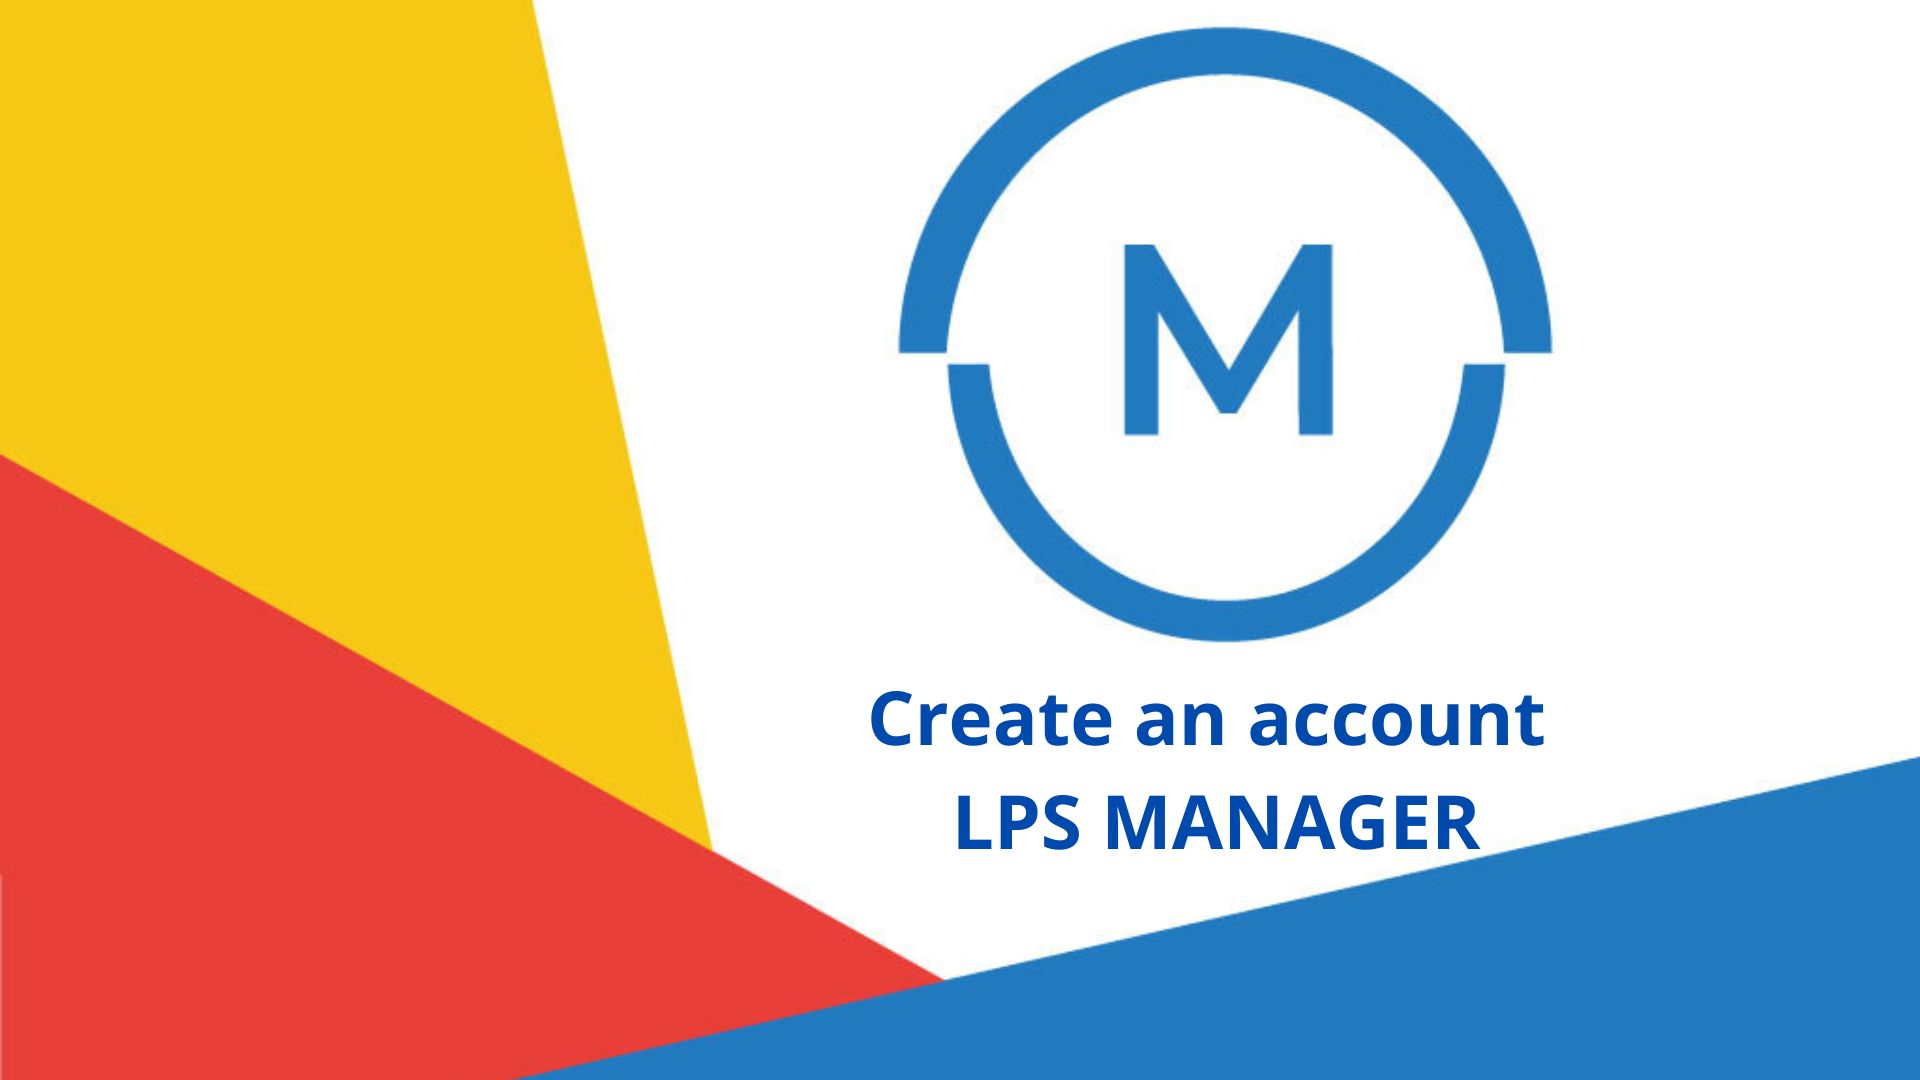 LPS Manager, create an account